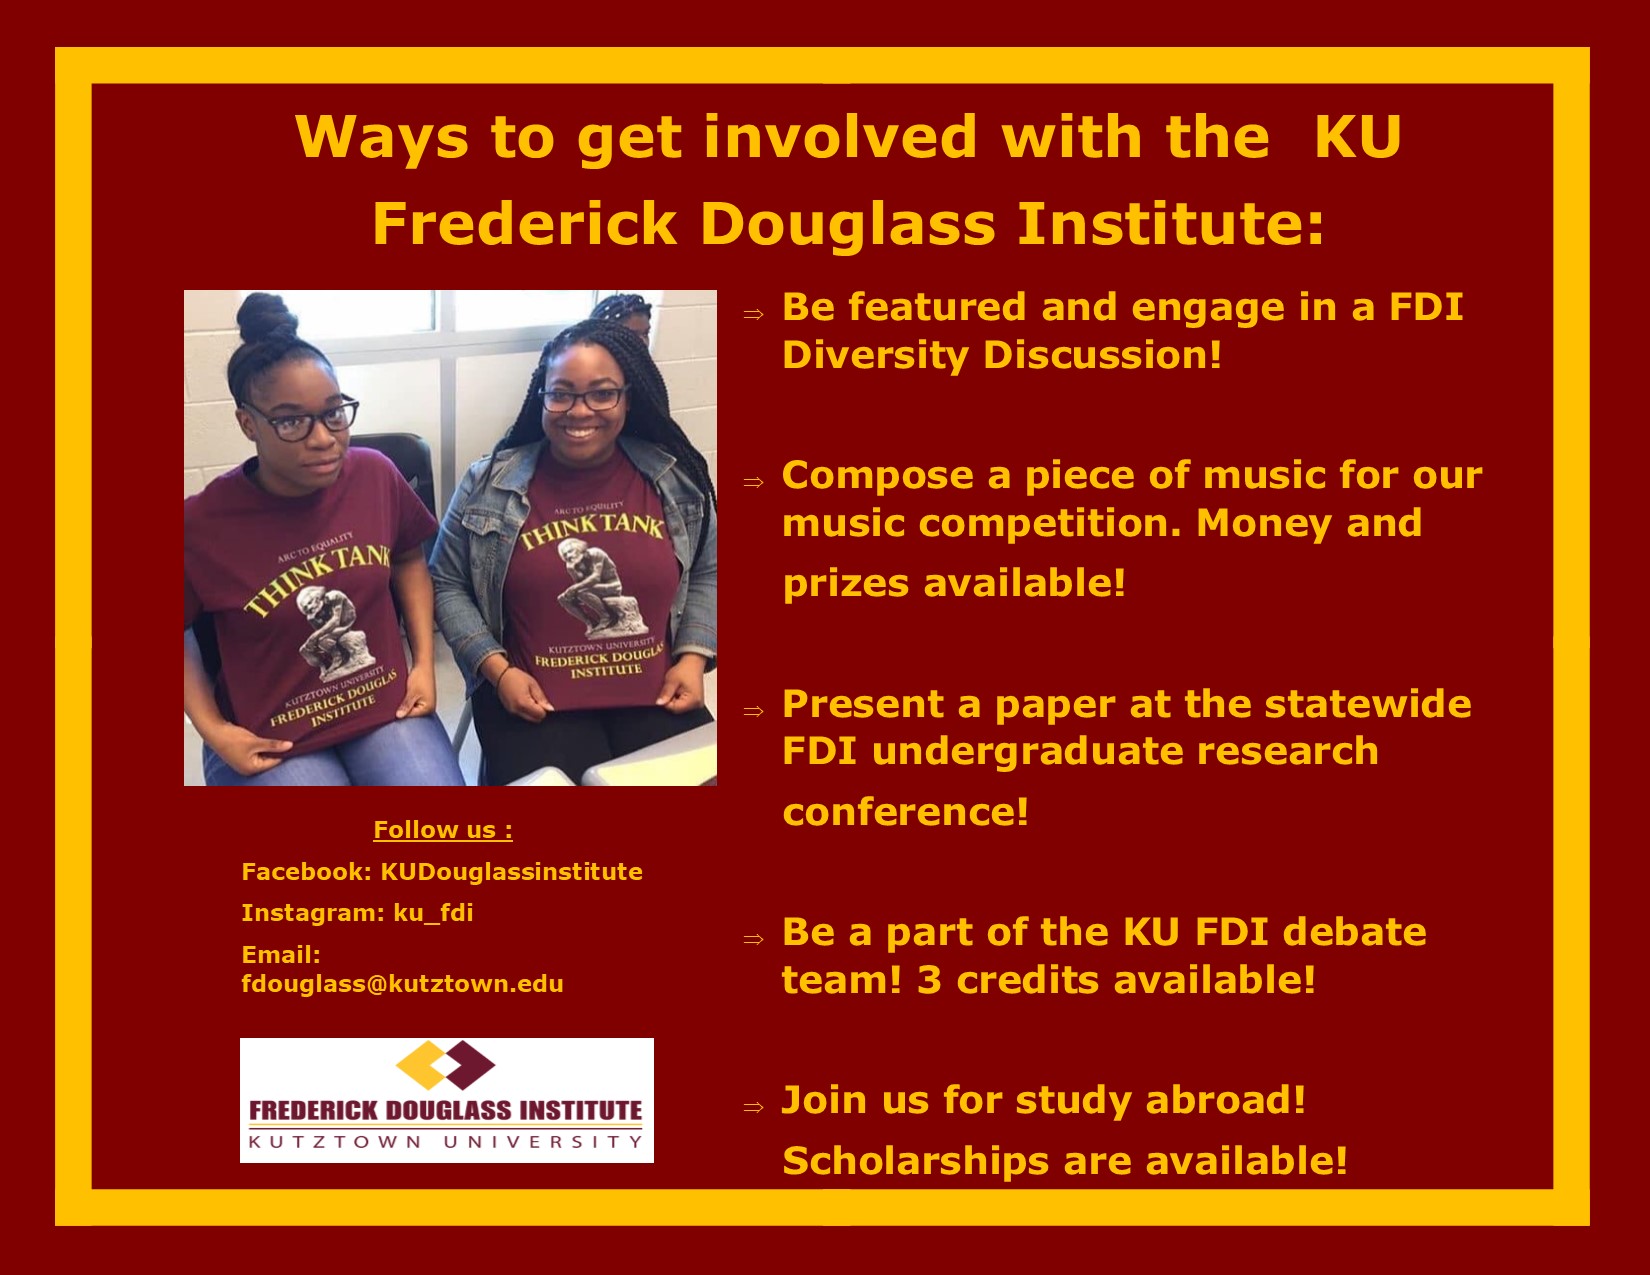 Get involved with the KU Frederick Douglass Institute 